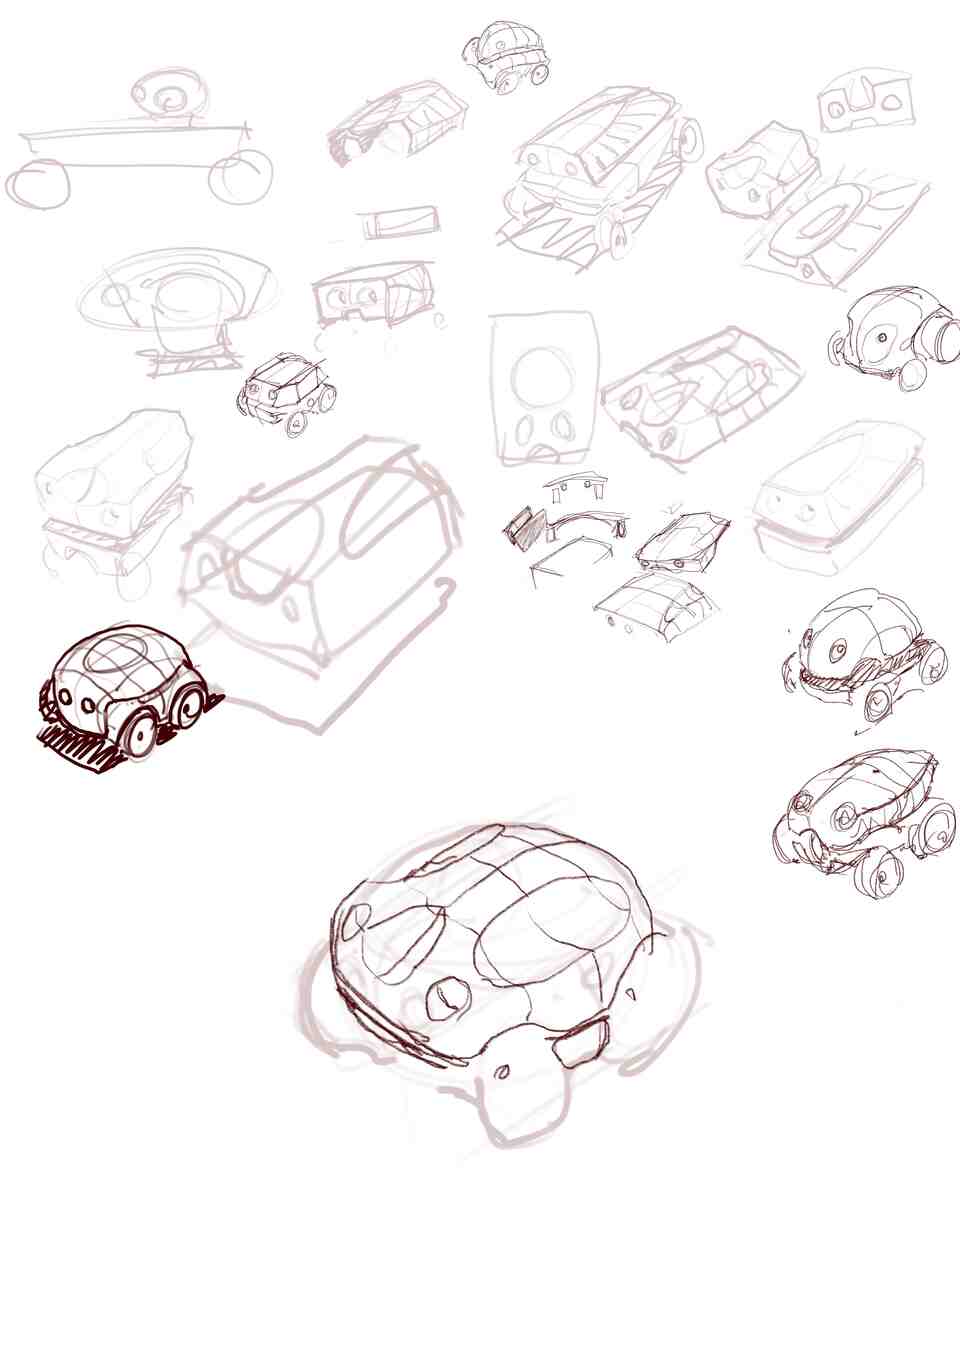 initial sketches